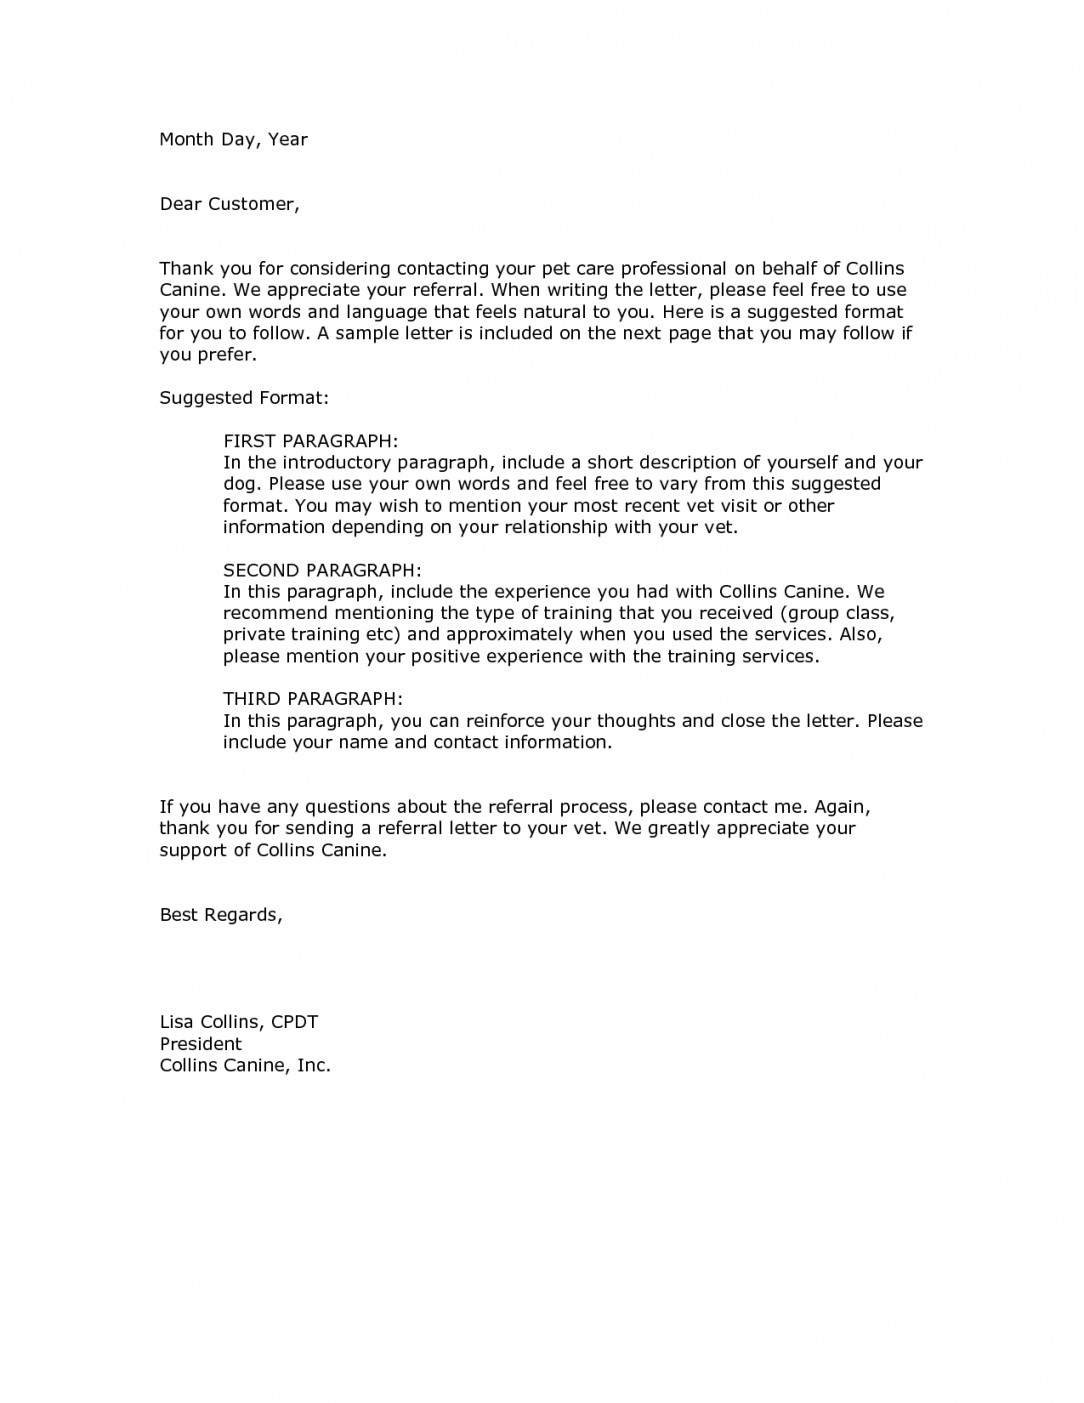 Customer Reference Letter Template Samples | Letter intended for Template For Referral Letter